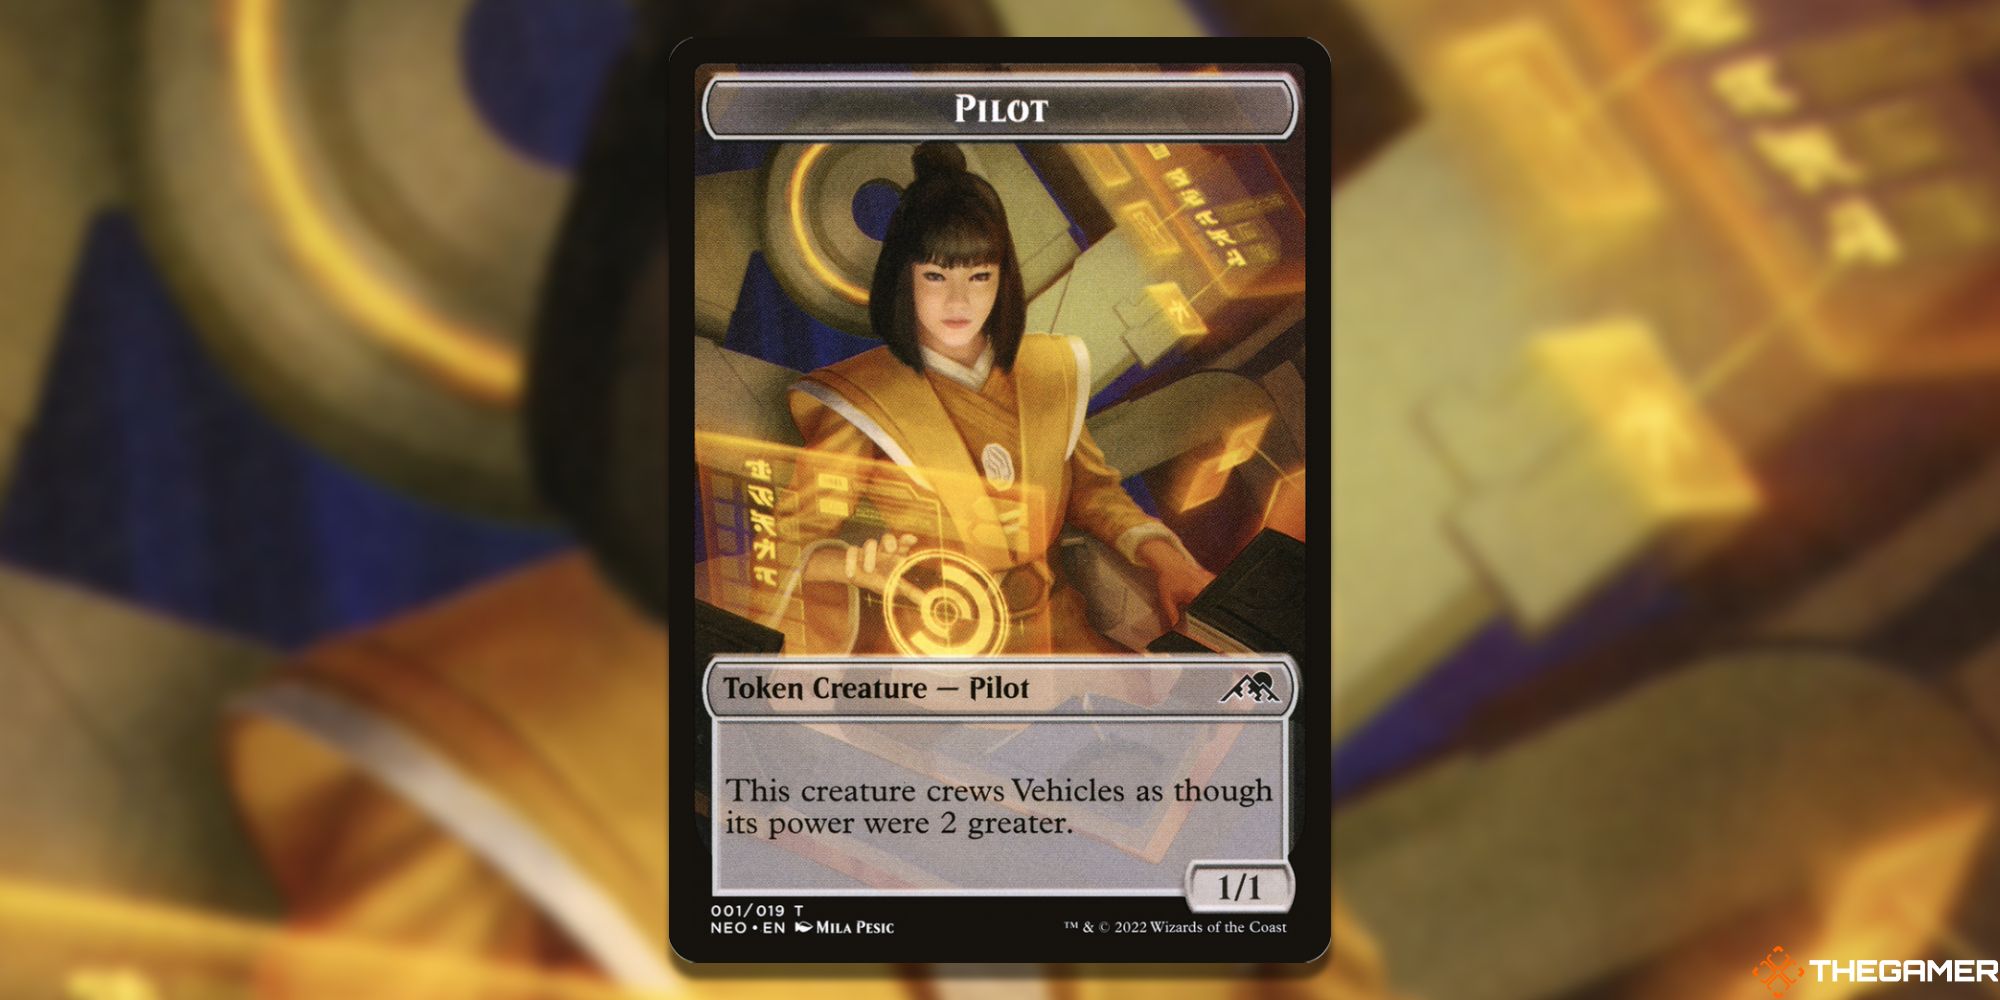 Image of the Pilot Token card in Magic: The Gathering, with art by Mila Pesic